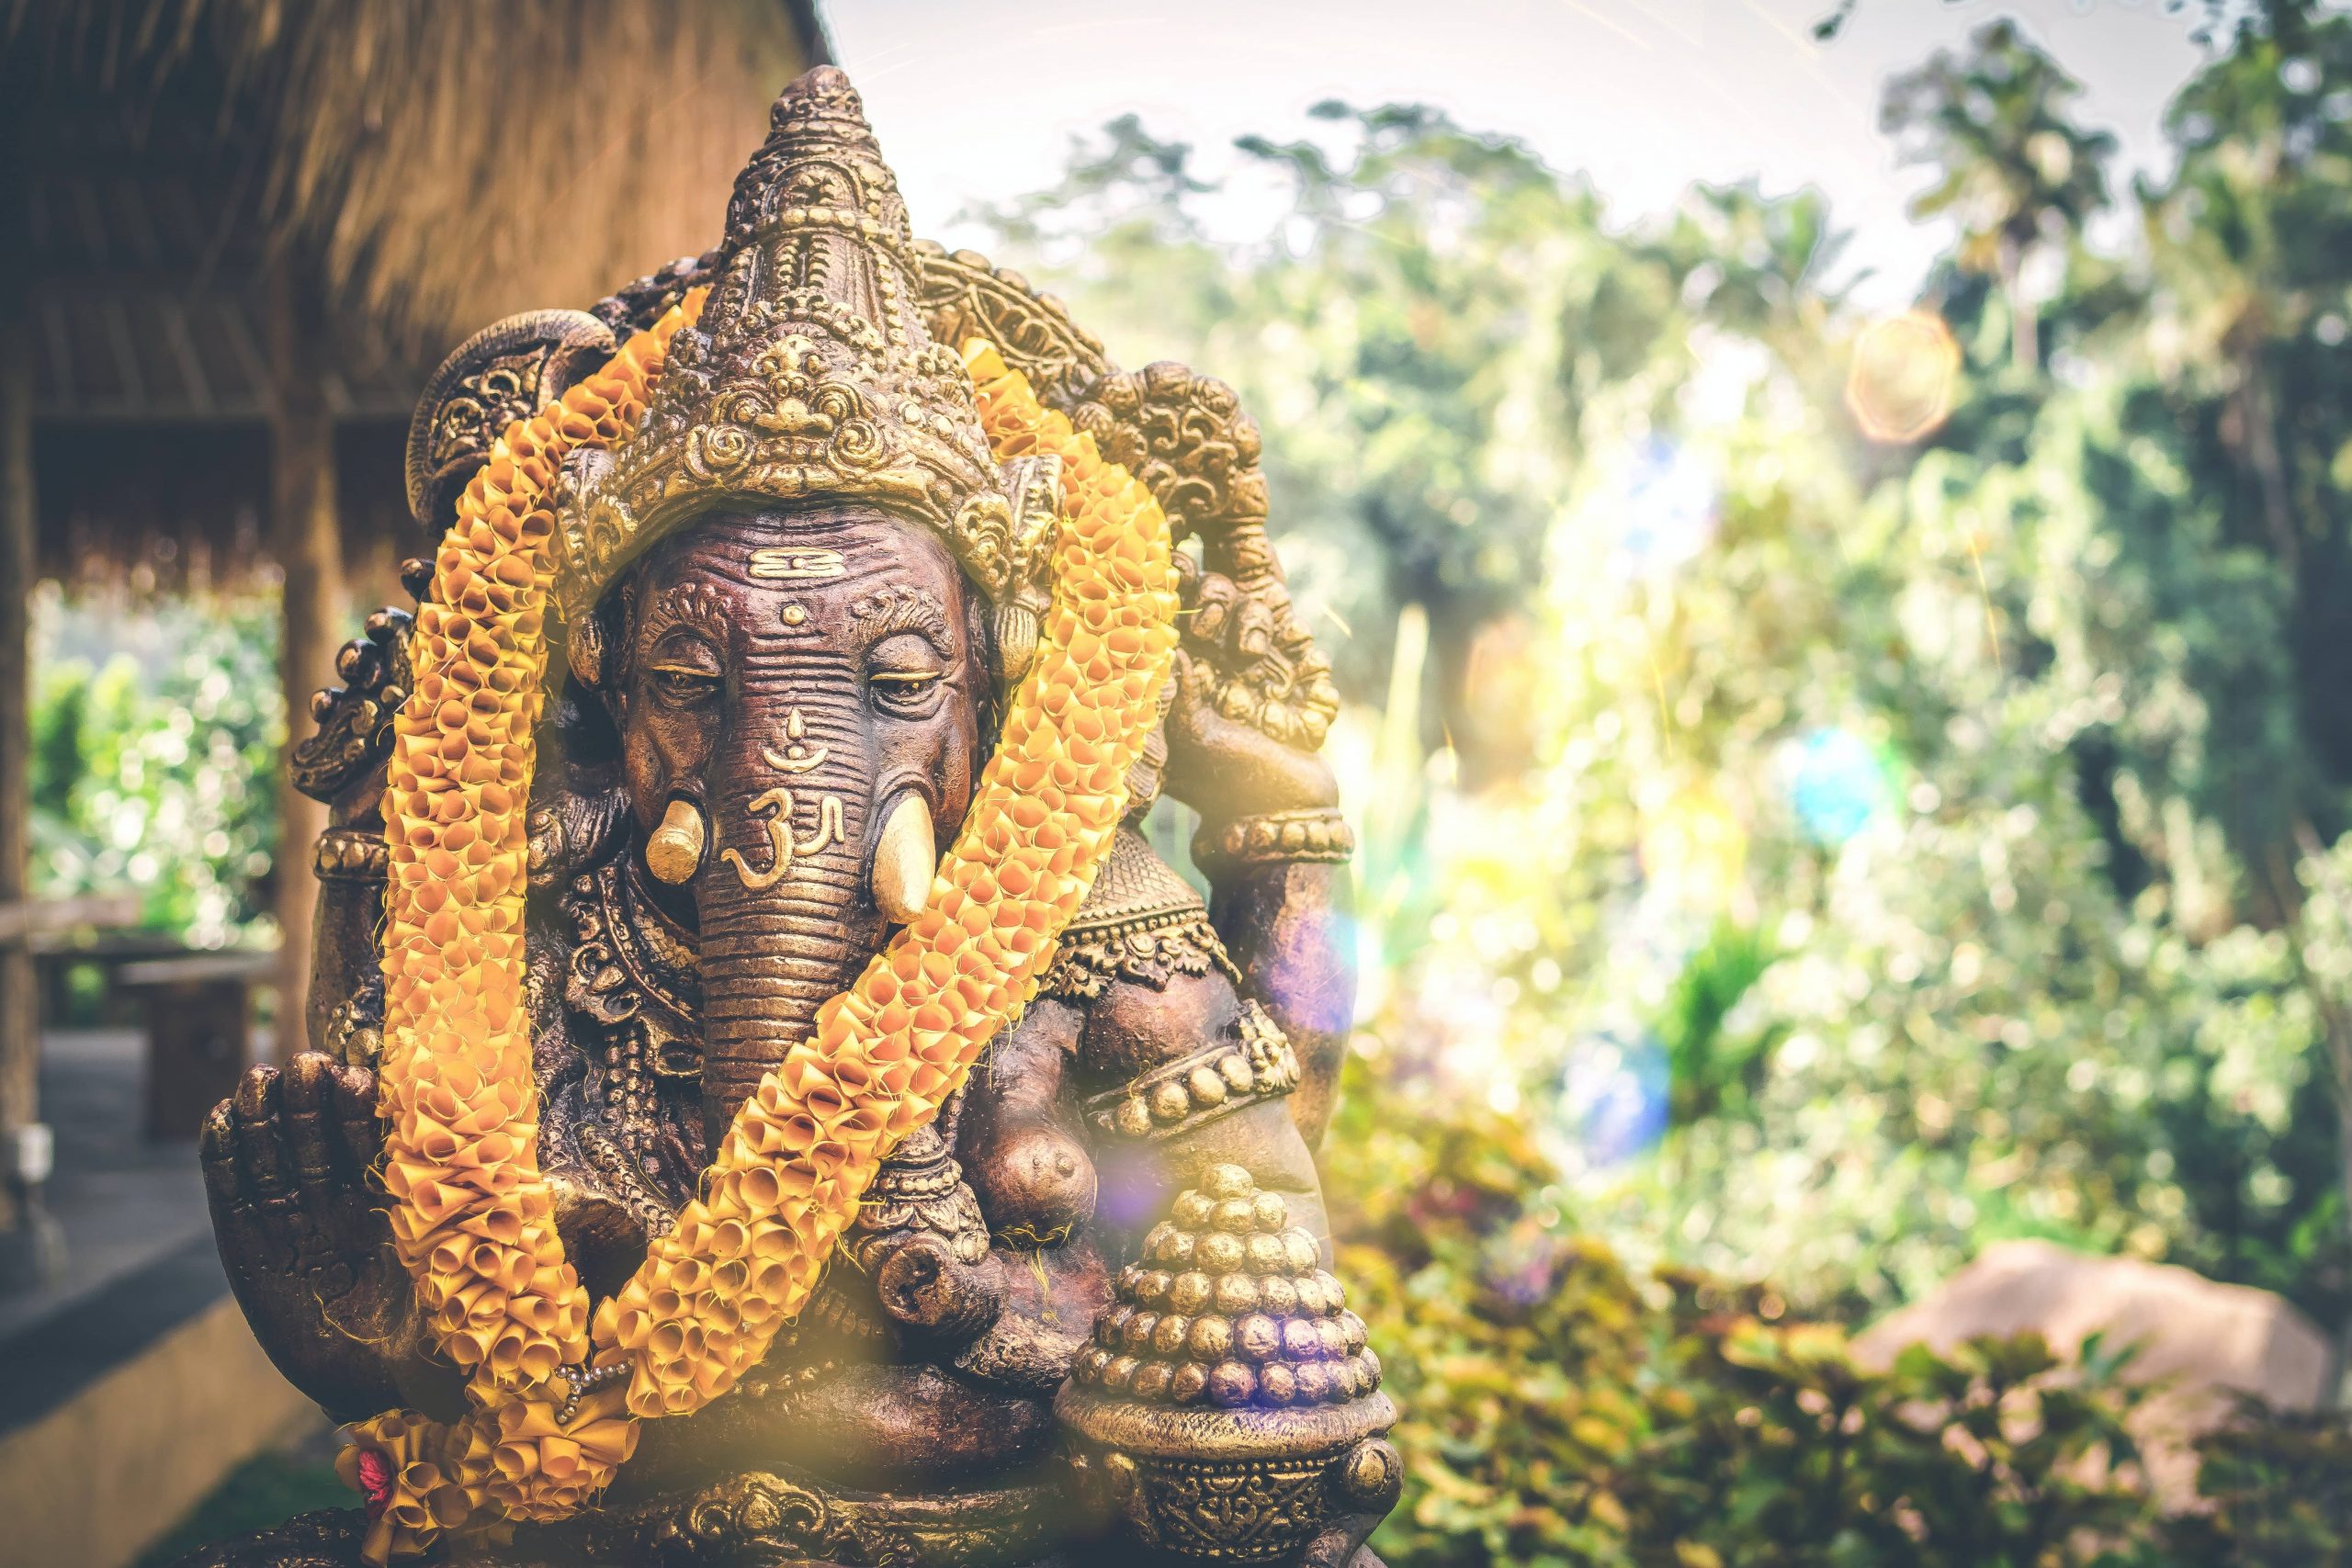 A Hindu Statue of the god Ganesh at a temple in Bali, Indonesia